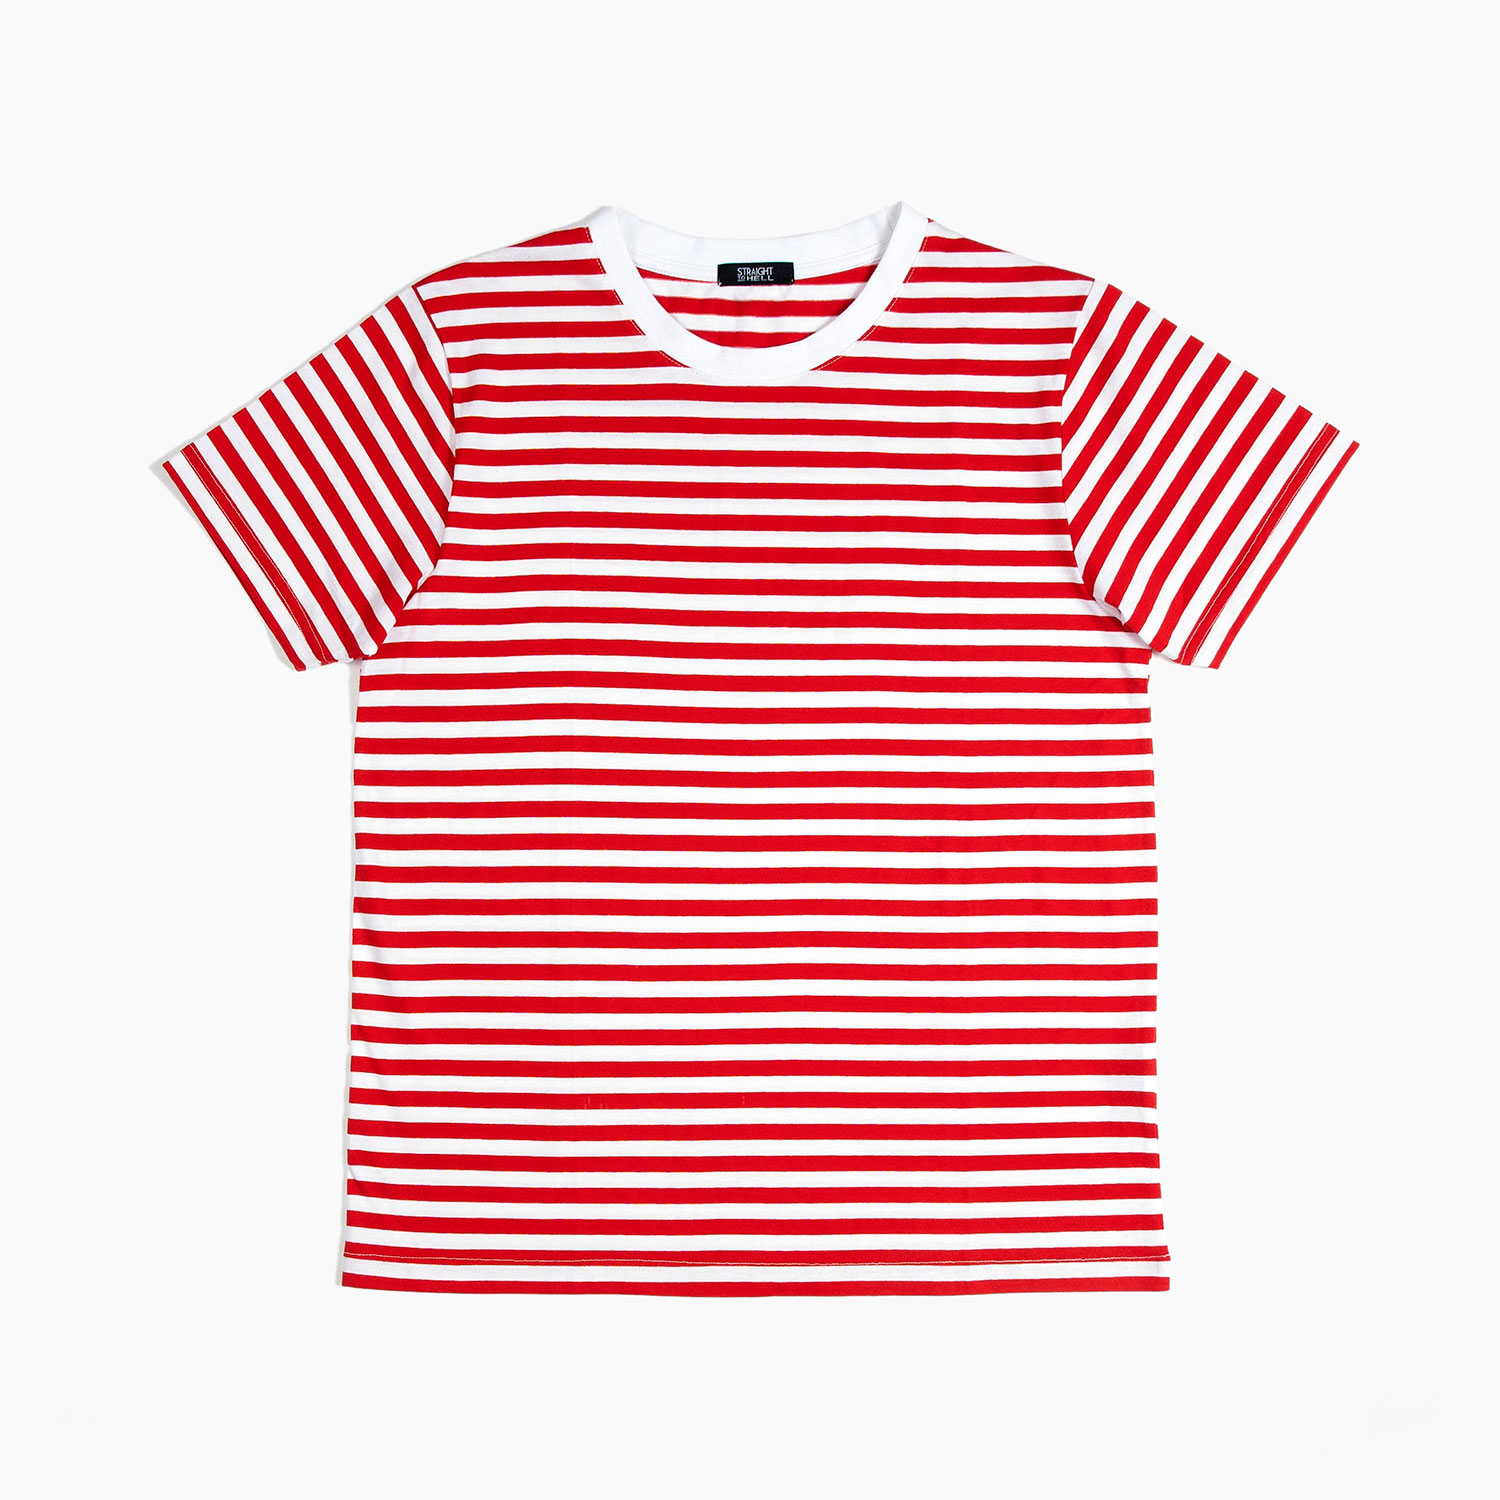 Jasper - White and Red Striped T-Shirt (Size XS, S, M, L, XL, 2XL) |  Straight To Hell Apparel